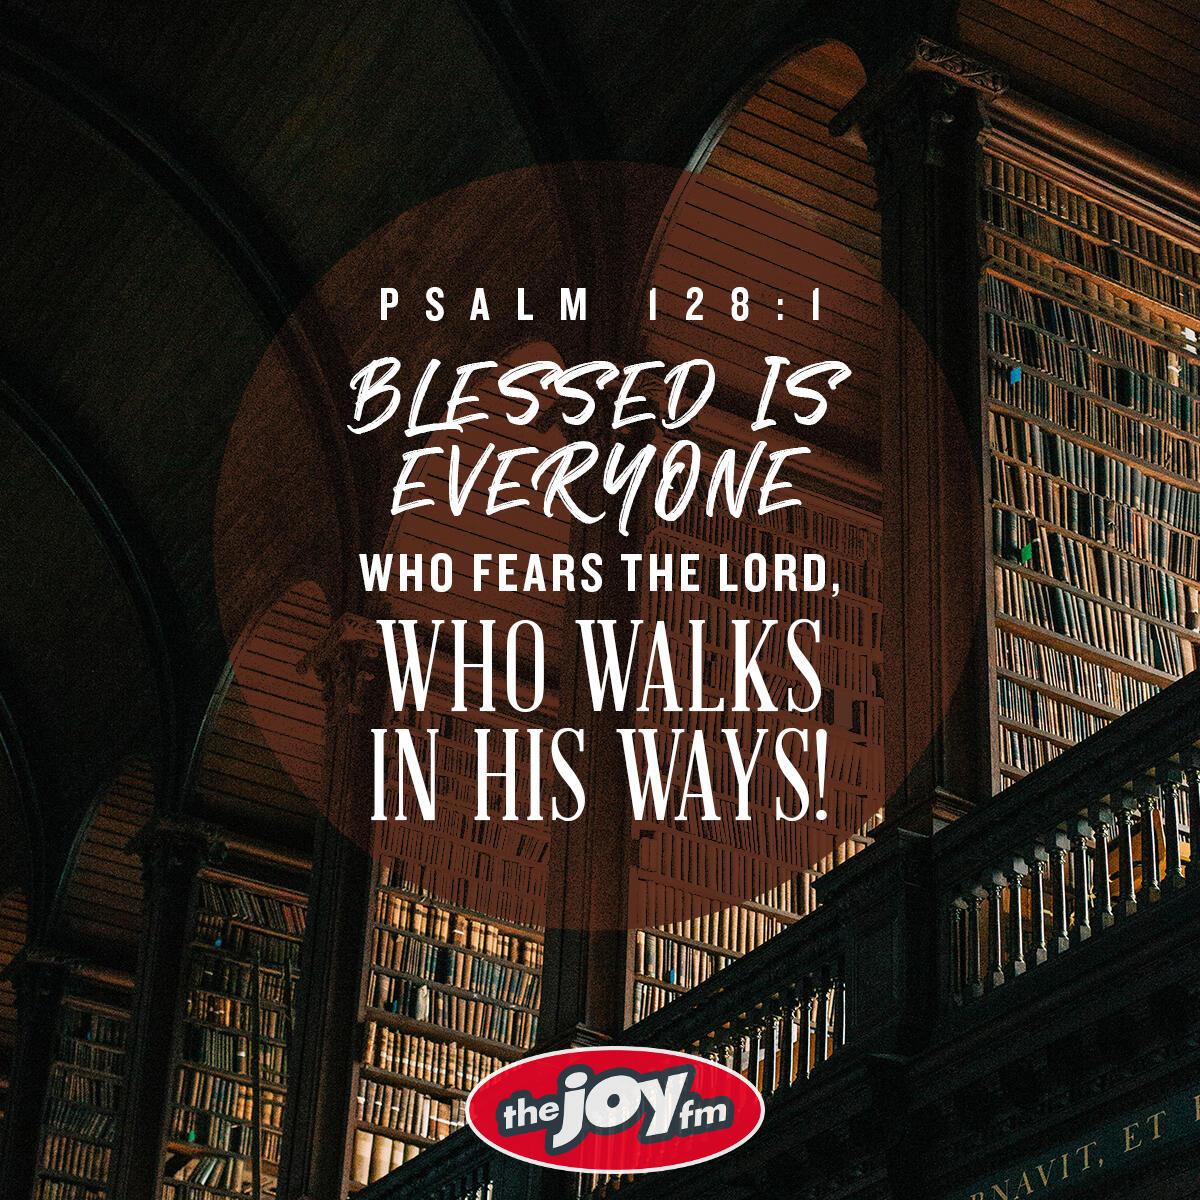 Psalm 128:1 - Verse of the Day